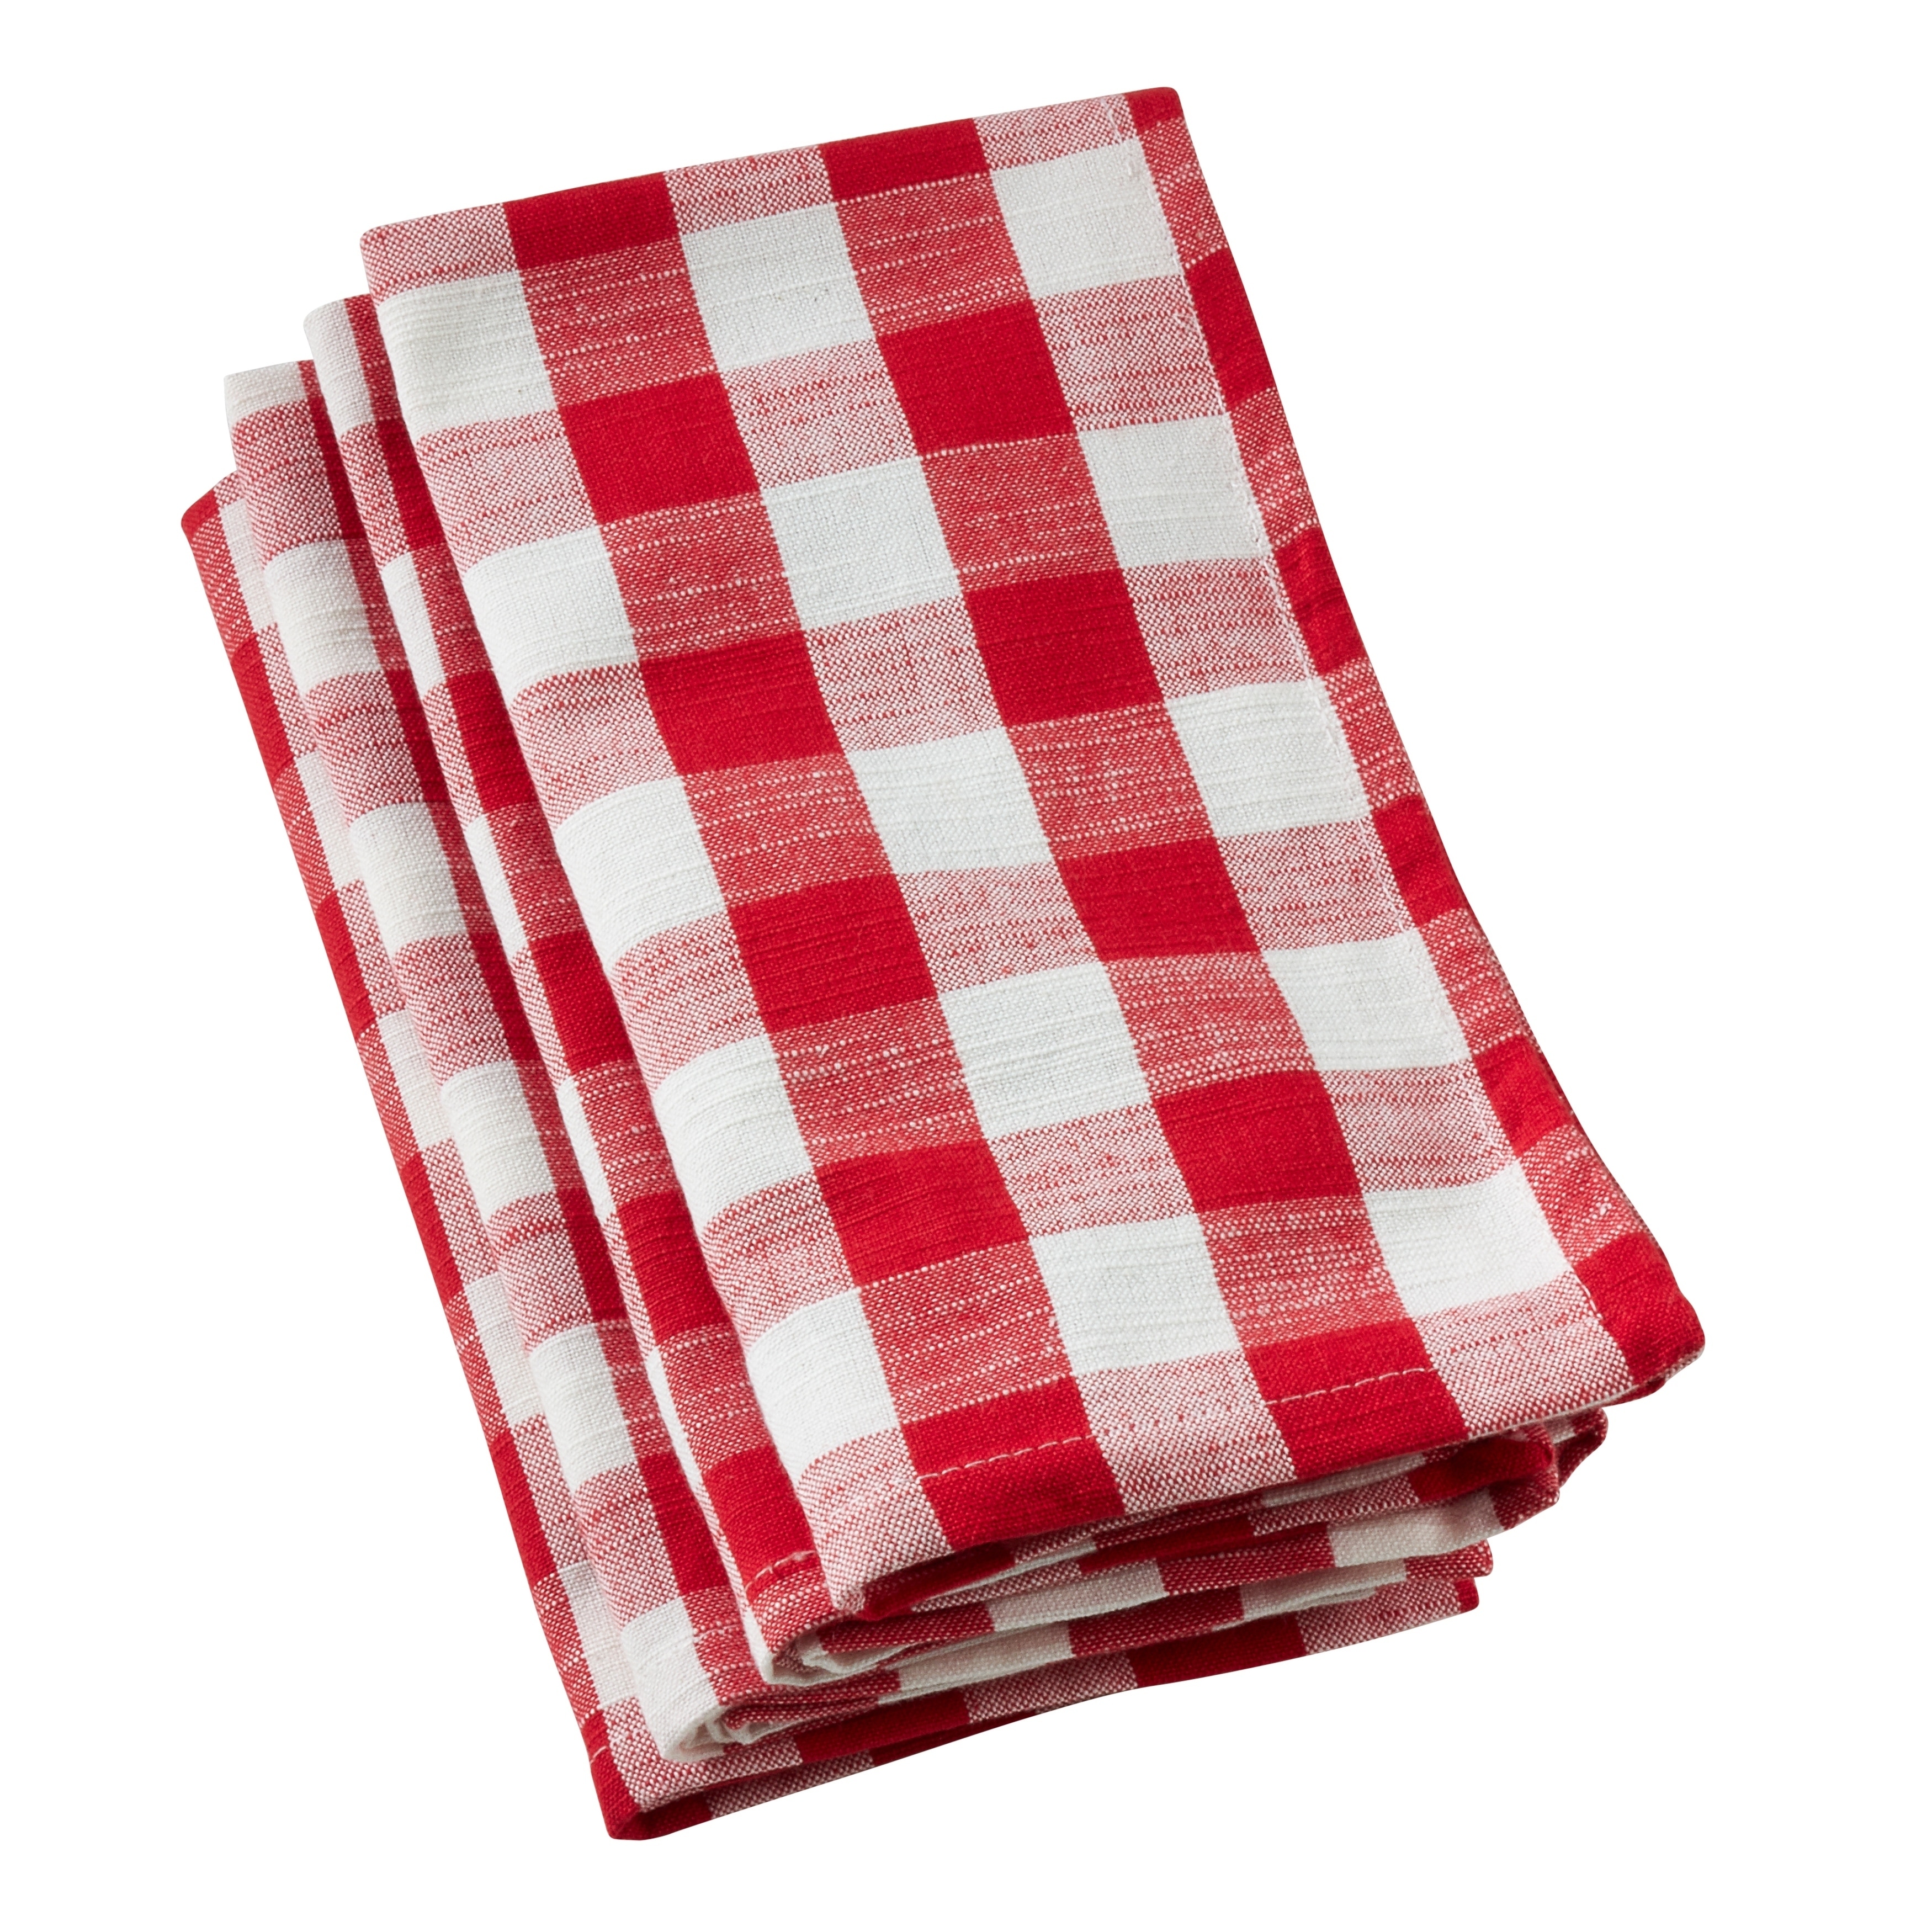 https://ak1.ostkcdn.com/images/products/12215421/Table-Napkins-With-Gingham-Design-Set-of-4-530e89b6-a8d6-4909-a987-ada4247286fc.jpg